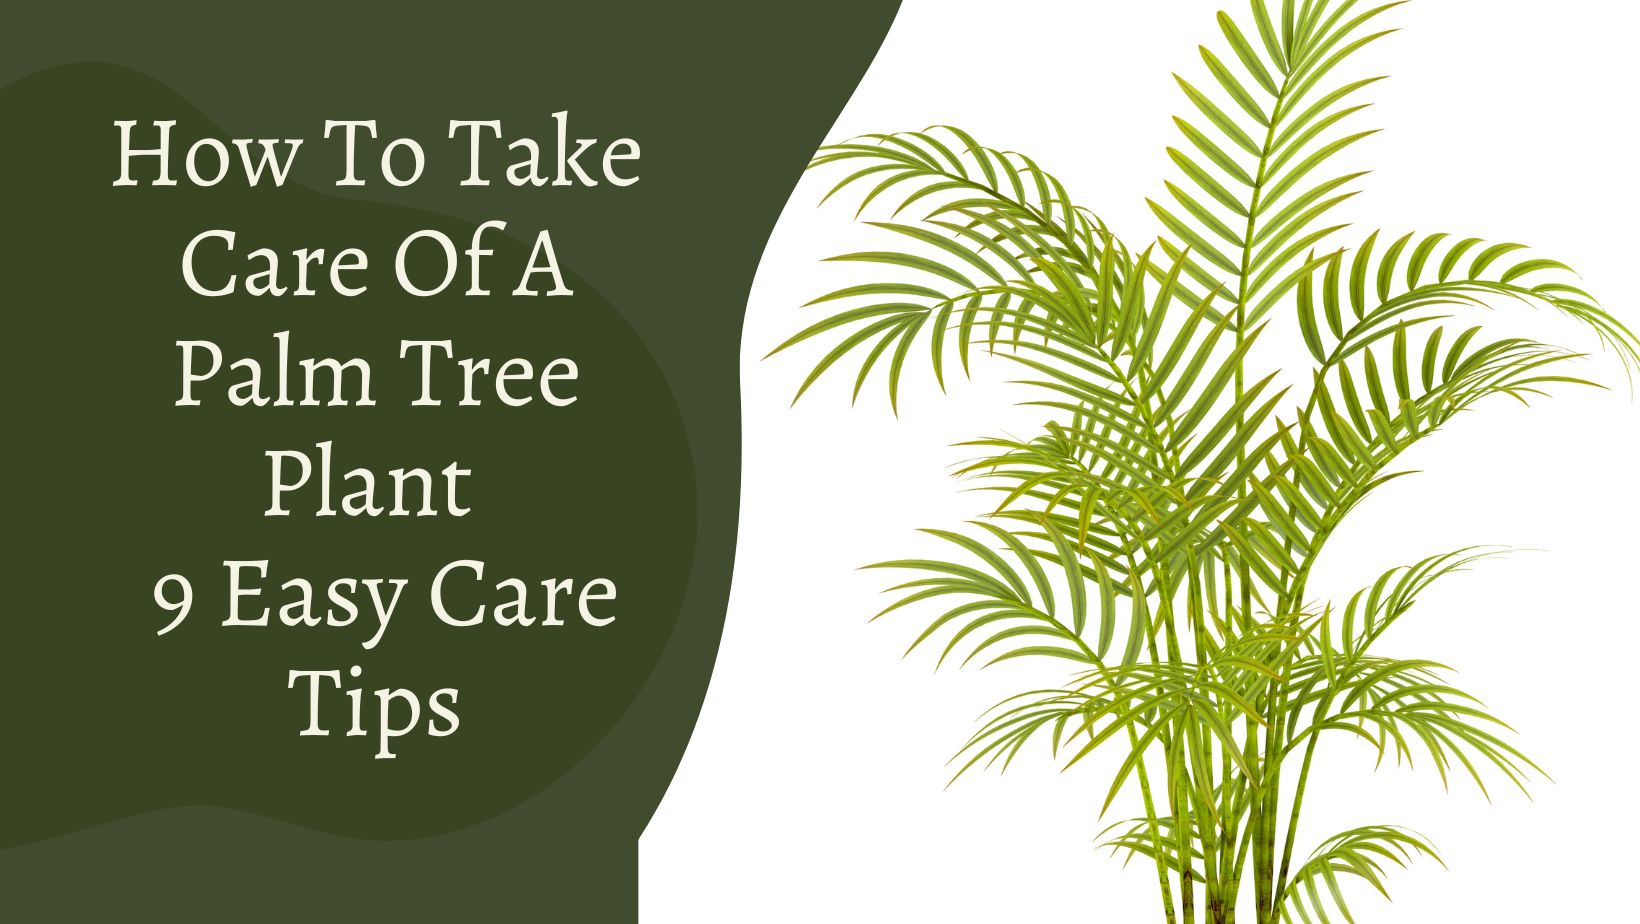 How To Take Care Of A Palm Tree Plant